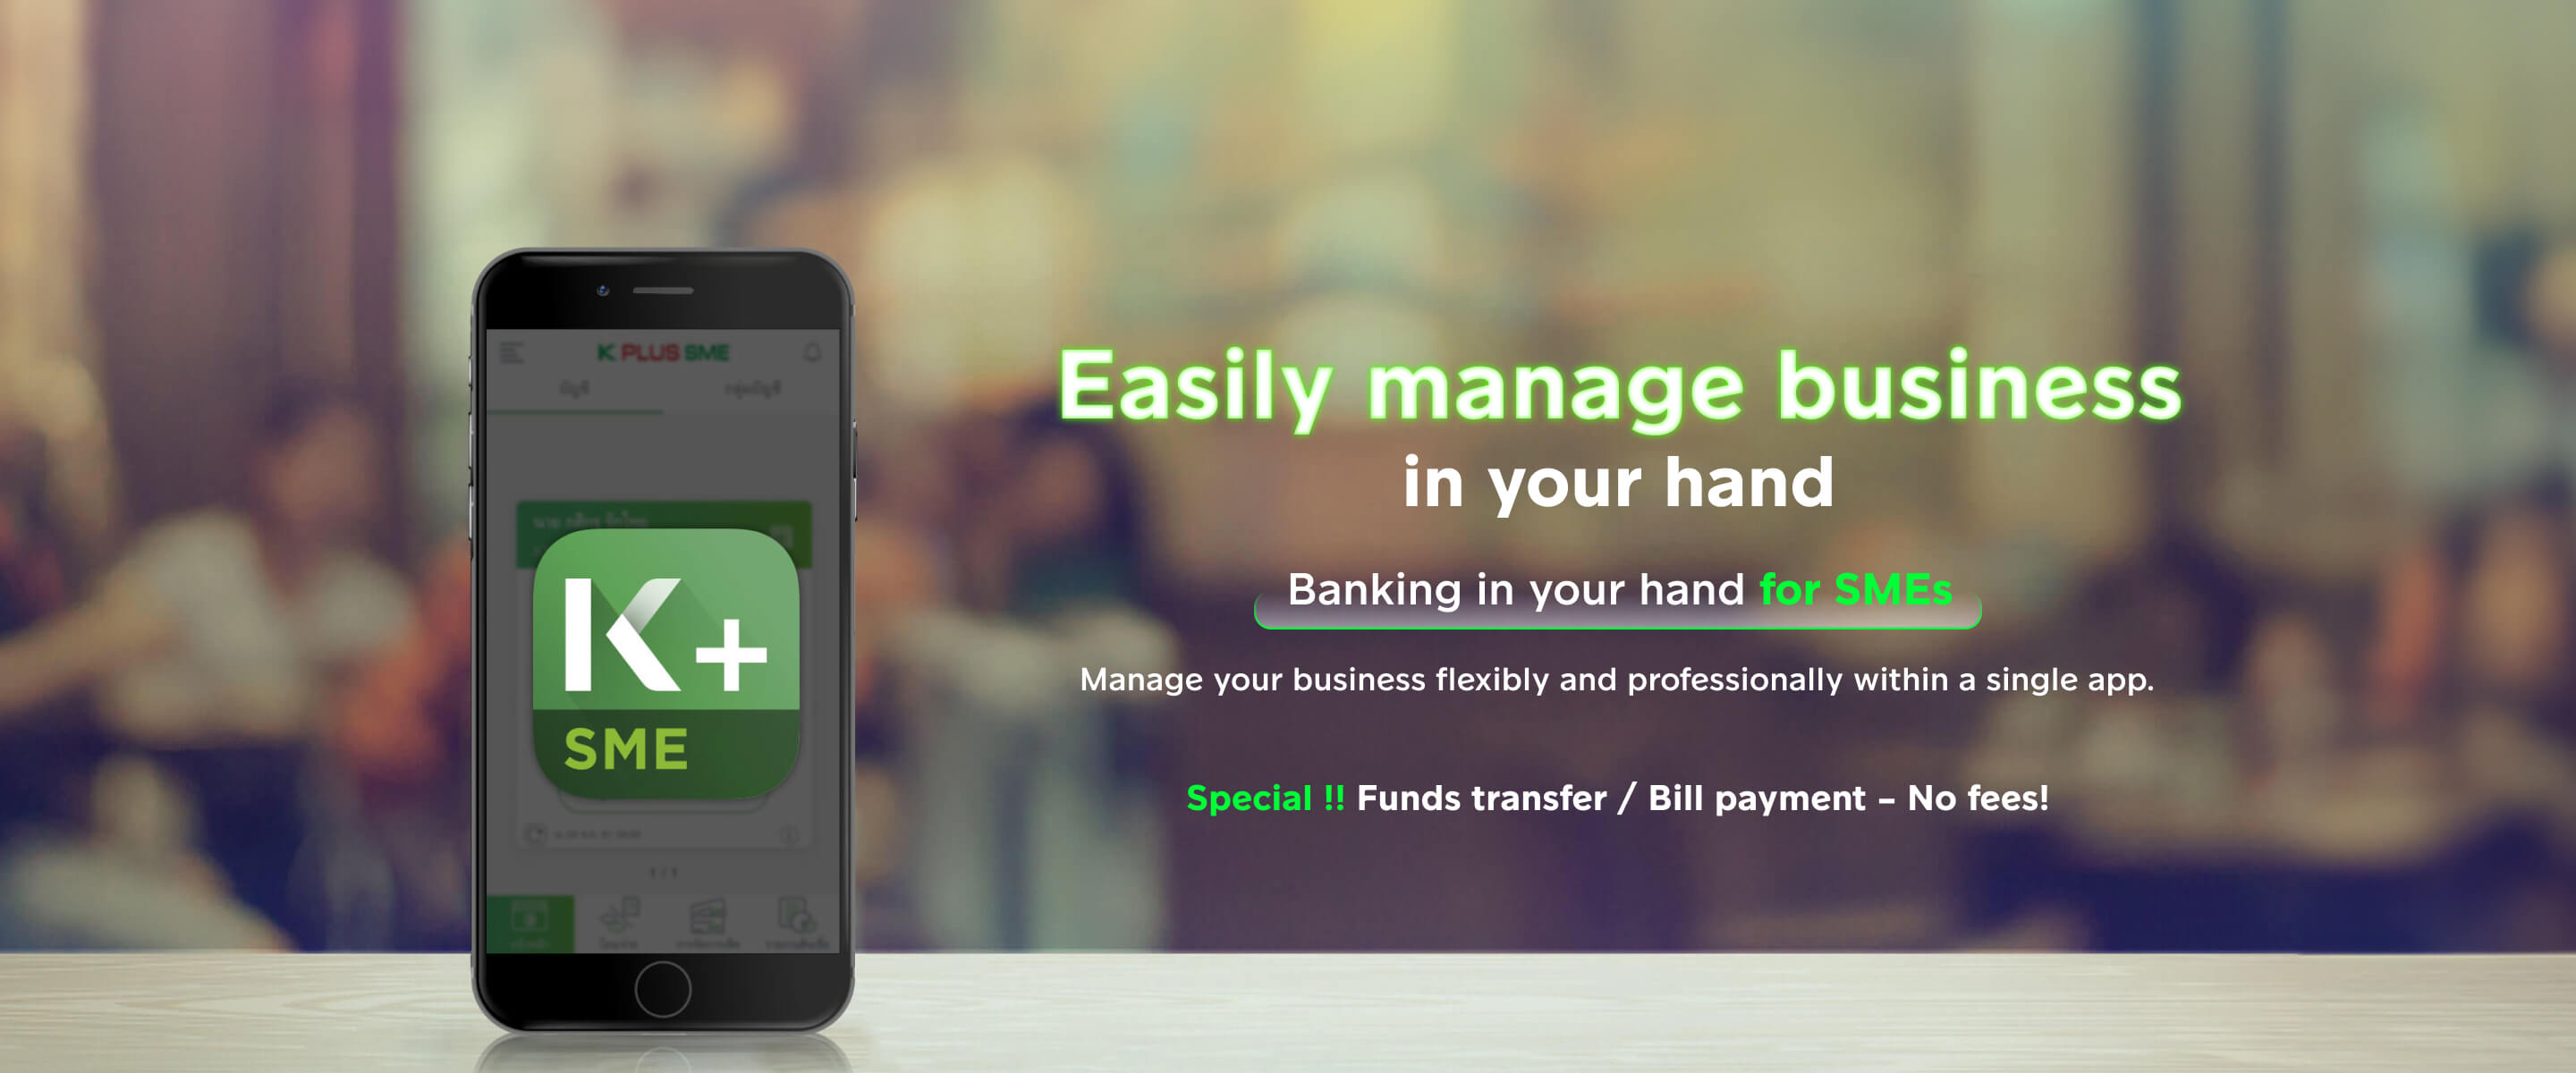 K PLUS SME Manage your business easily in the palm of your hand.